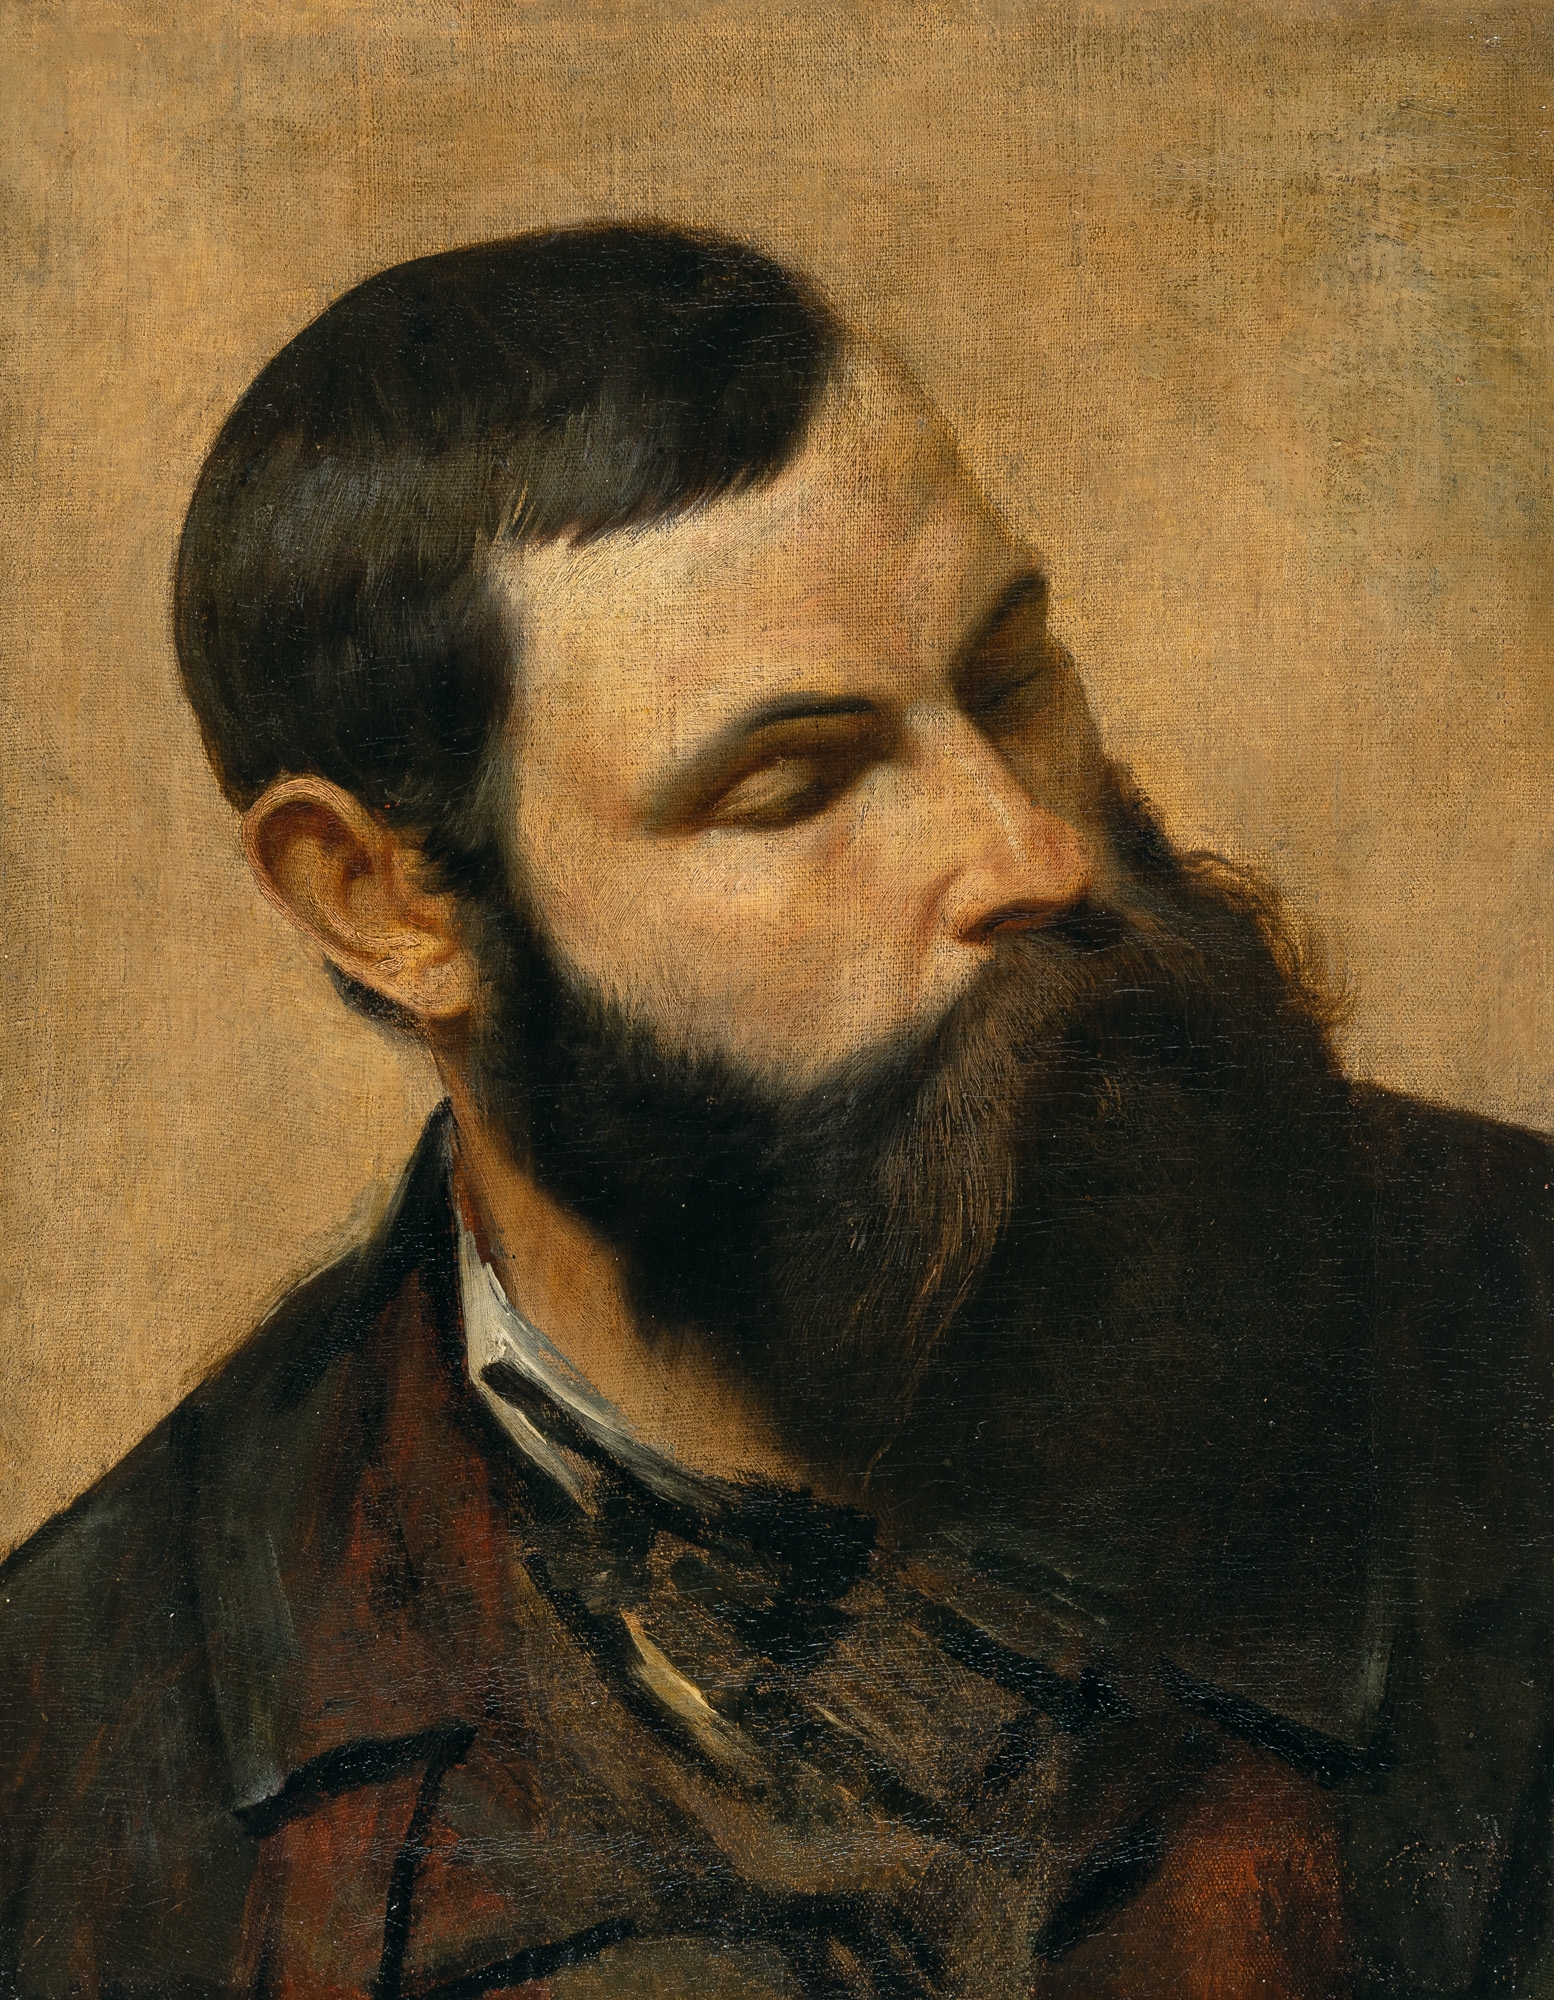 Portrait of a bearded man by Gustave Courbet